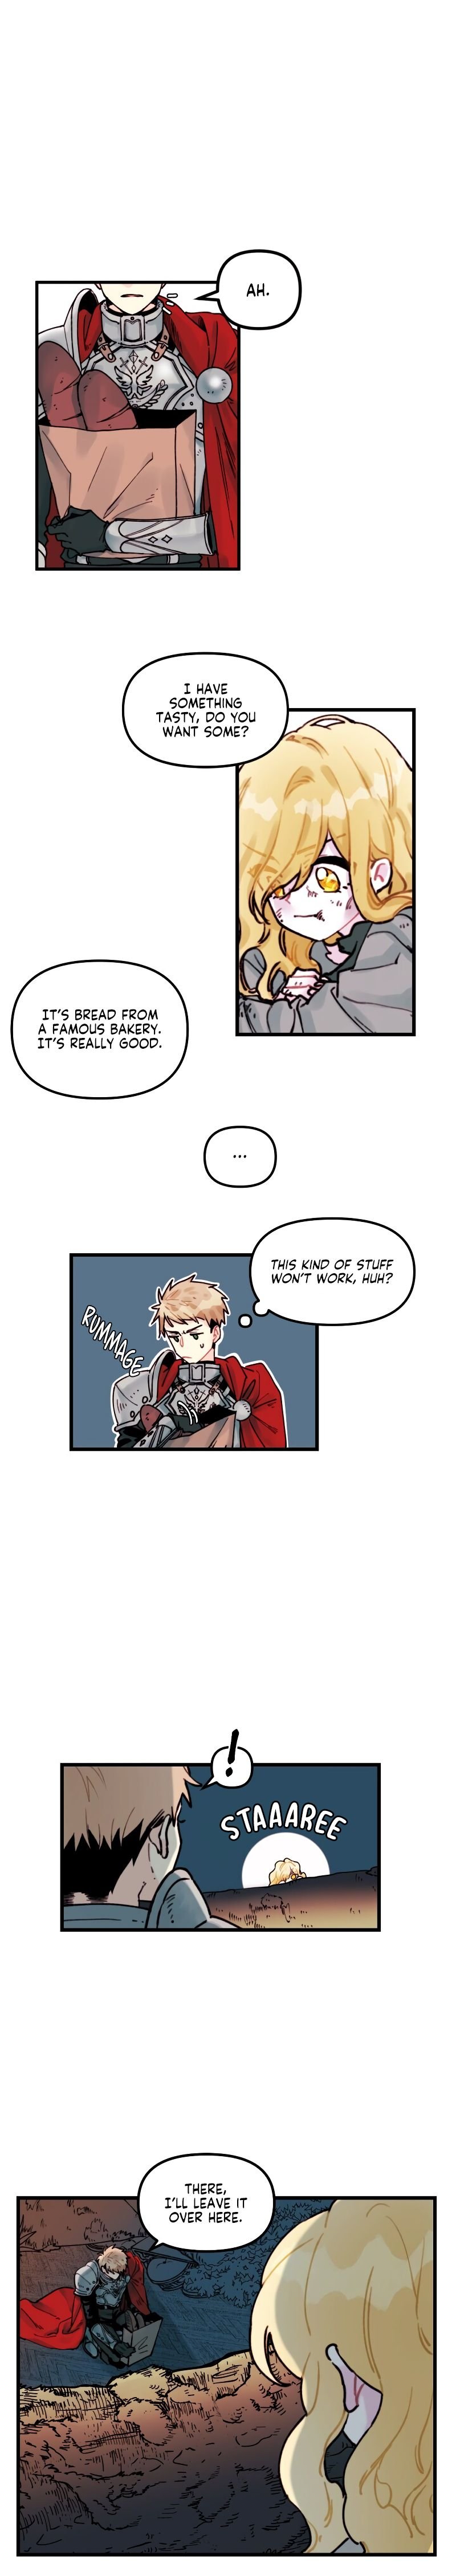 the-princess-in-the-dumpster-chap-3-5